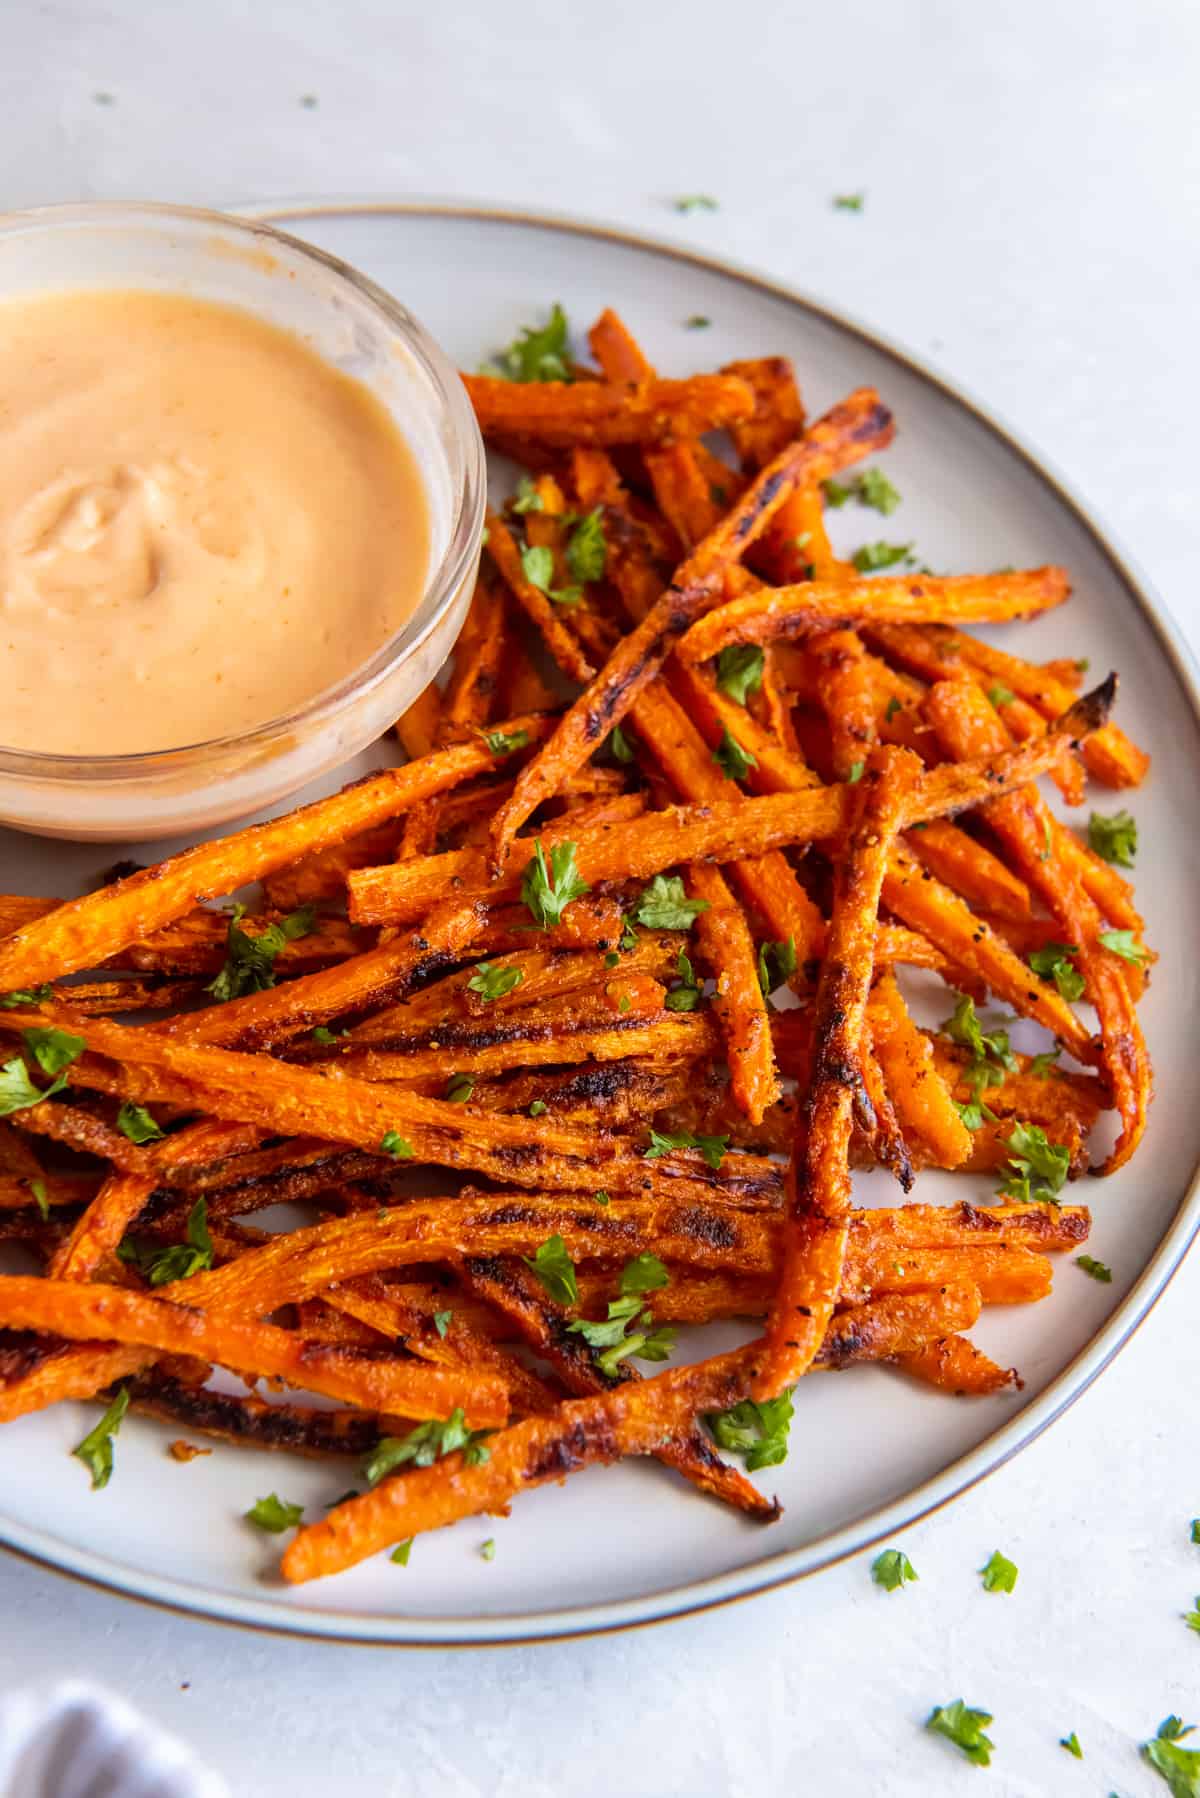 Carrot fries on a white plate with a small bowl of sriracha dipping sauce.